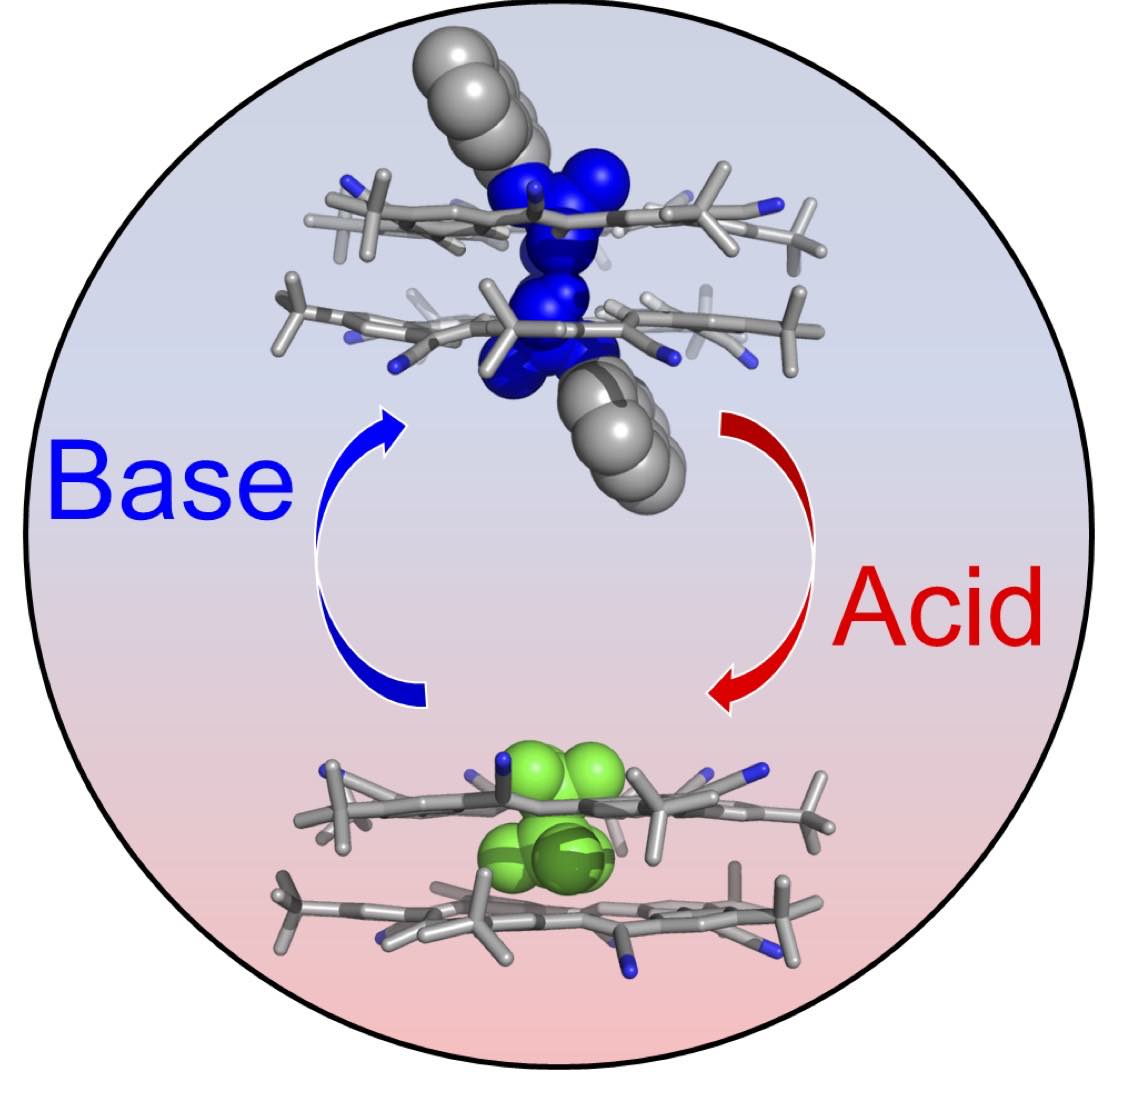 High Fidelity Multi-state Switching with Anion-Anion and Acid-Anion Dimers of Organophosphates in Cyanostar Complexes